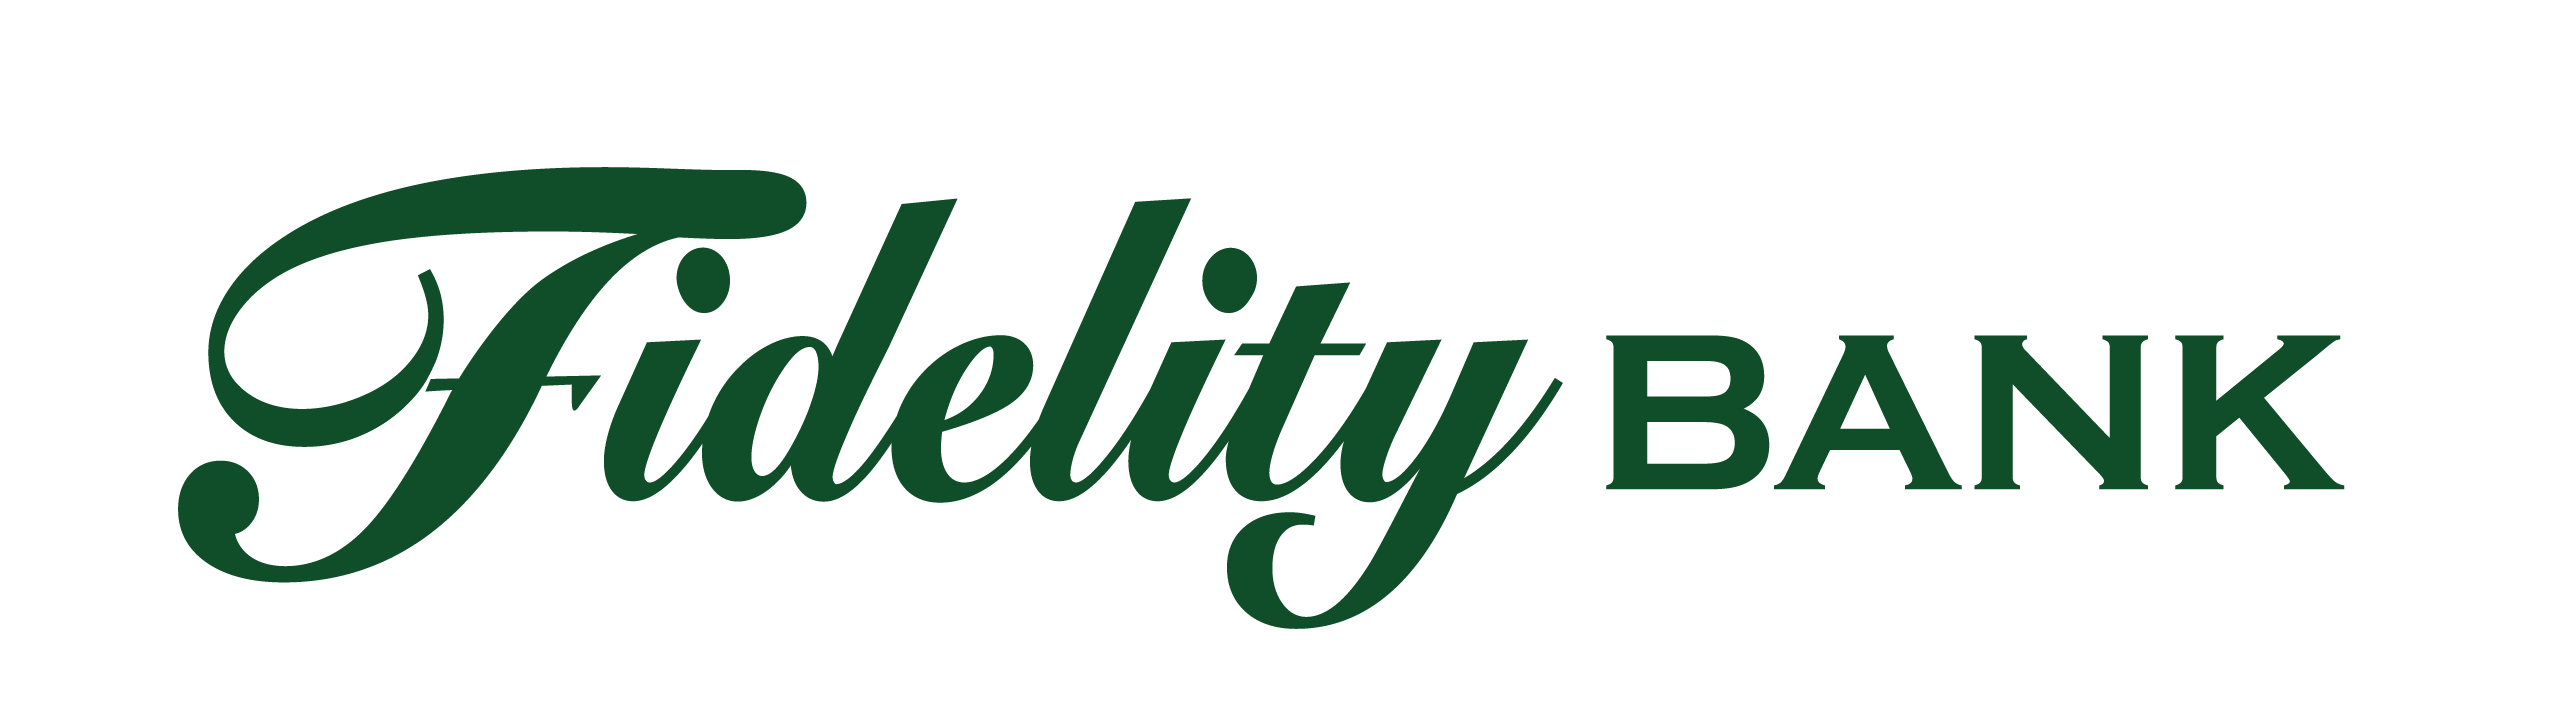 Fidelity Bank Logo - Green PNG.png